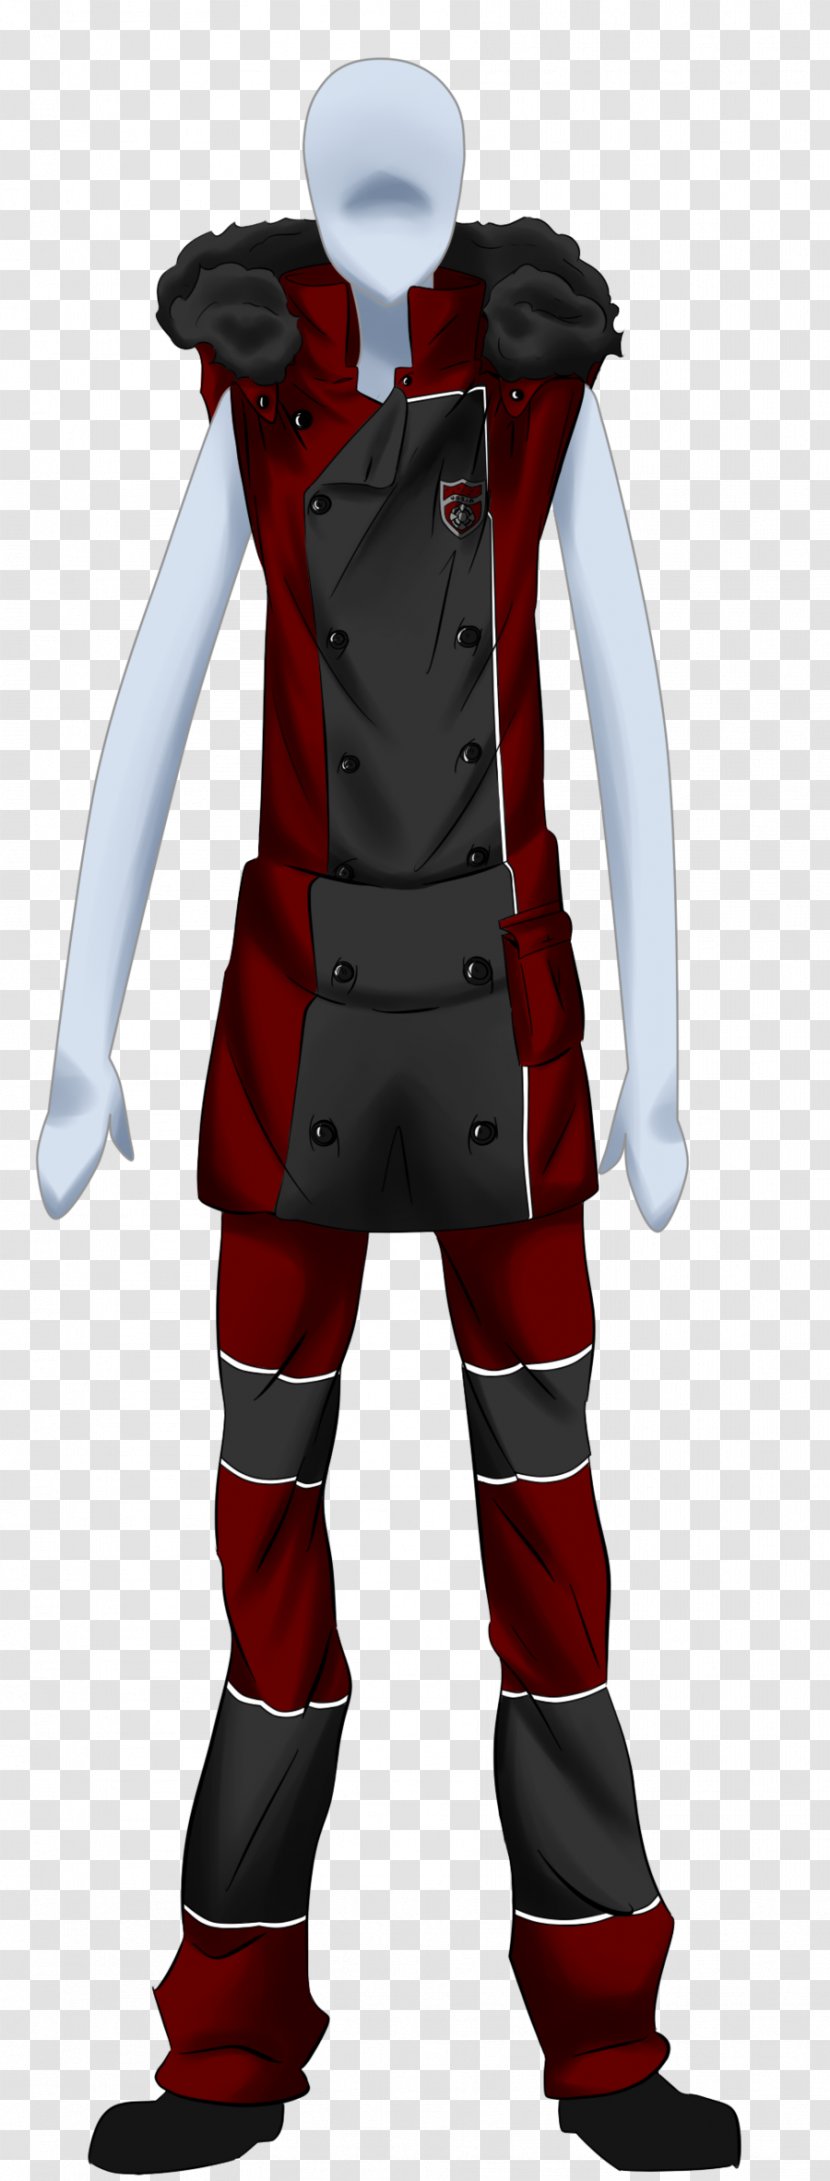 Costume Design Character Fiction - Outerwear - Varia Transparent PNG